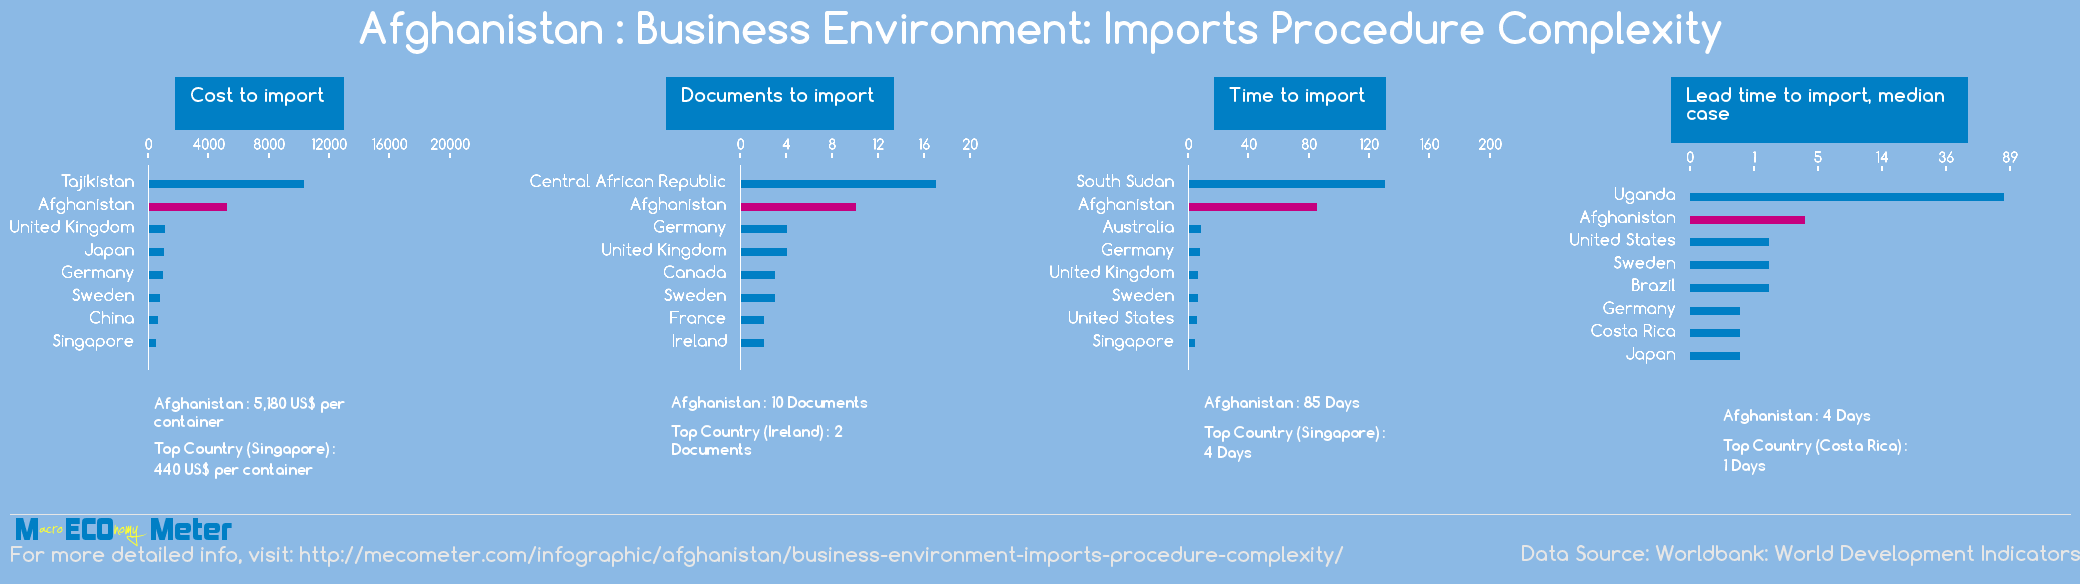 Afghanistan : Business Environment: Imports Procedure Complexity